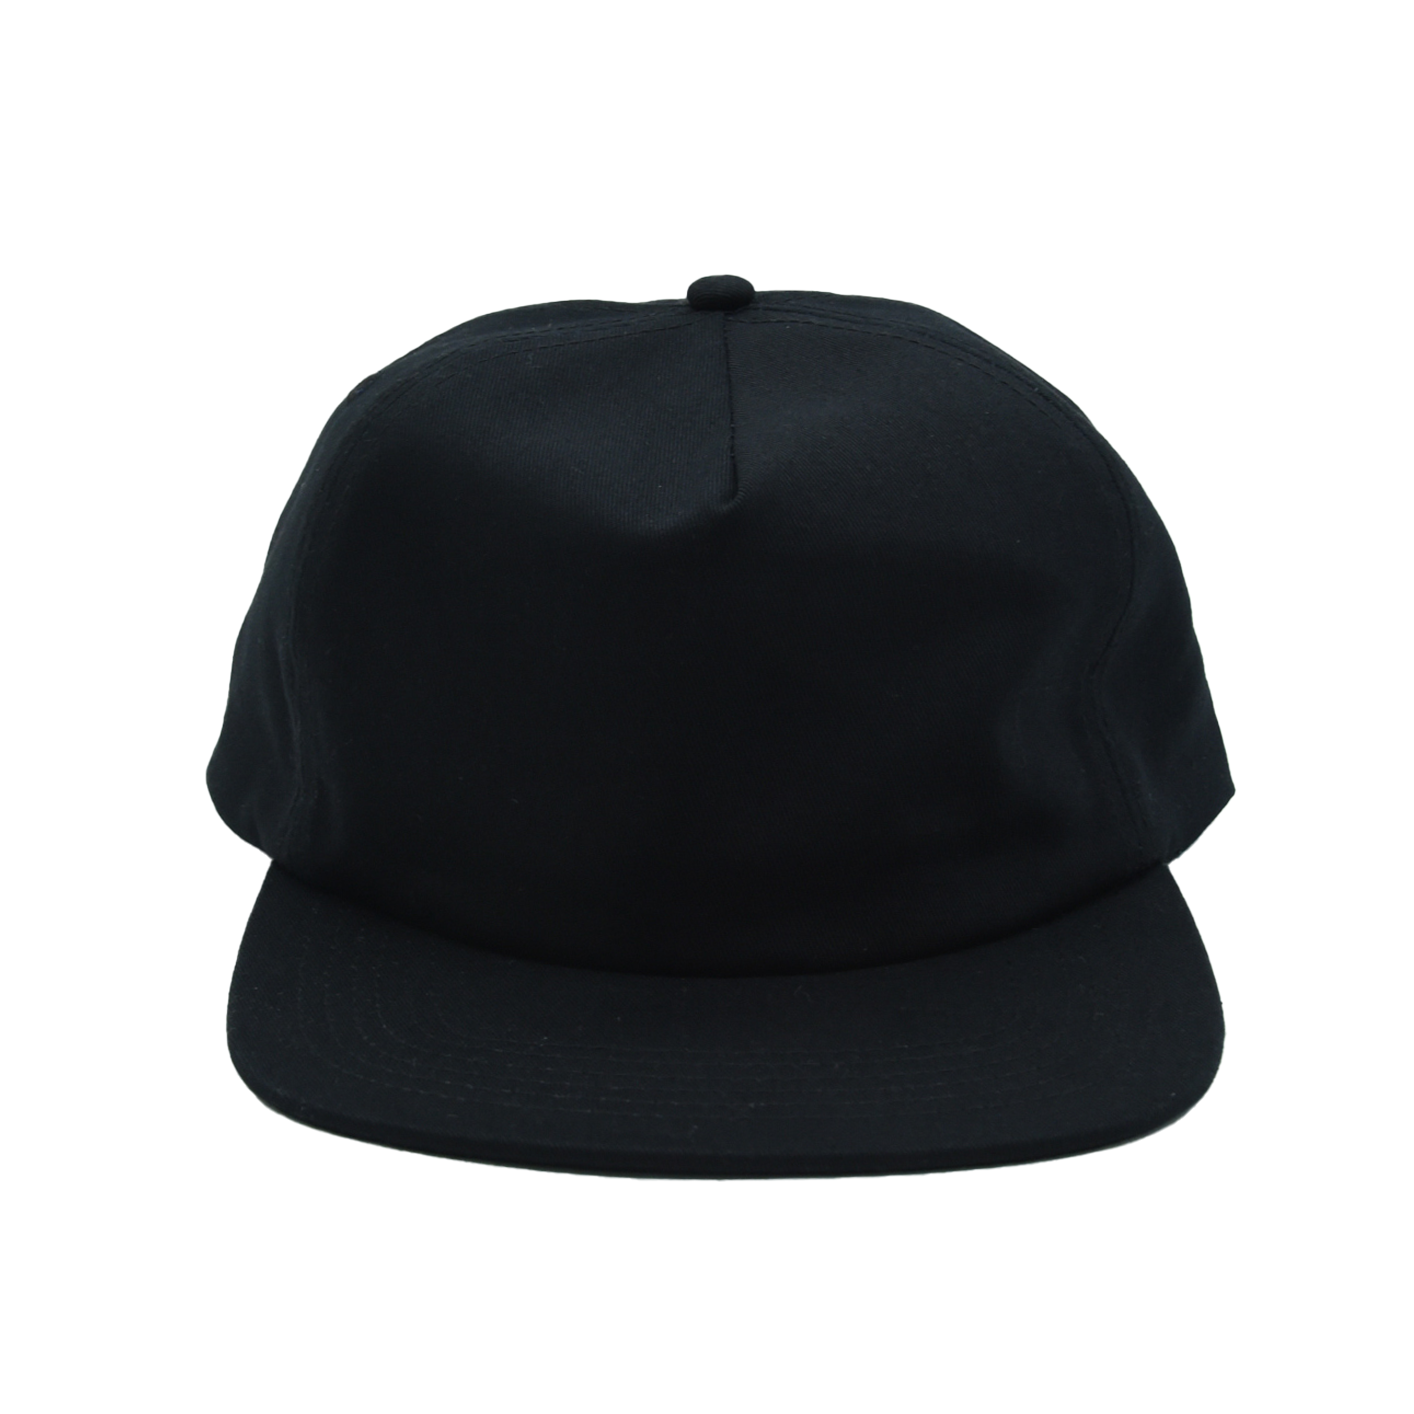 Black 5-Panel Cotton Snapback Hat Blank - Front view only